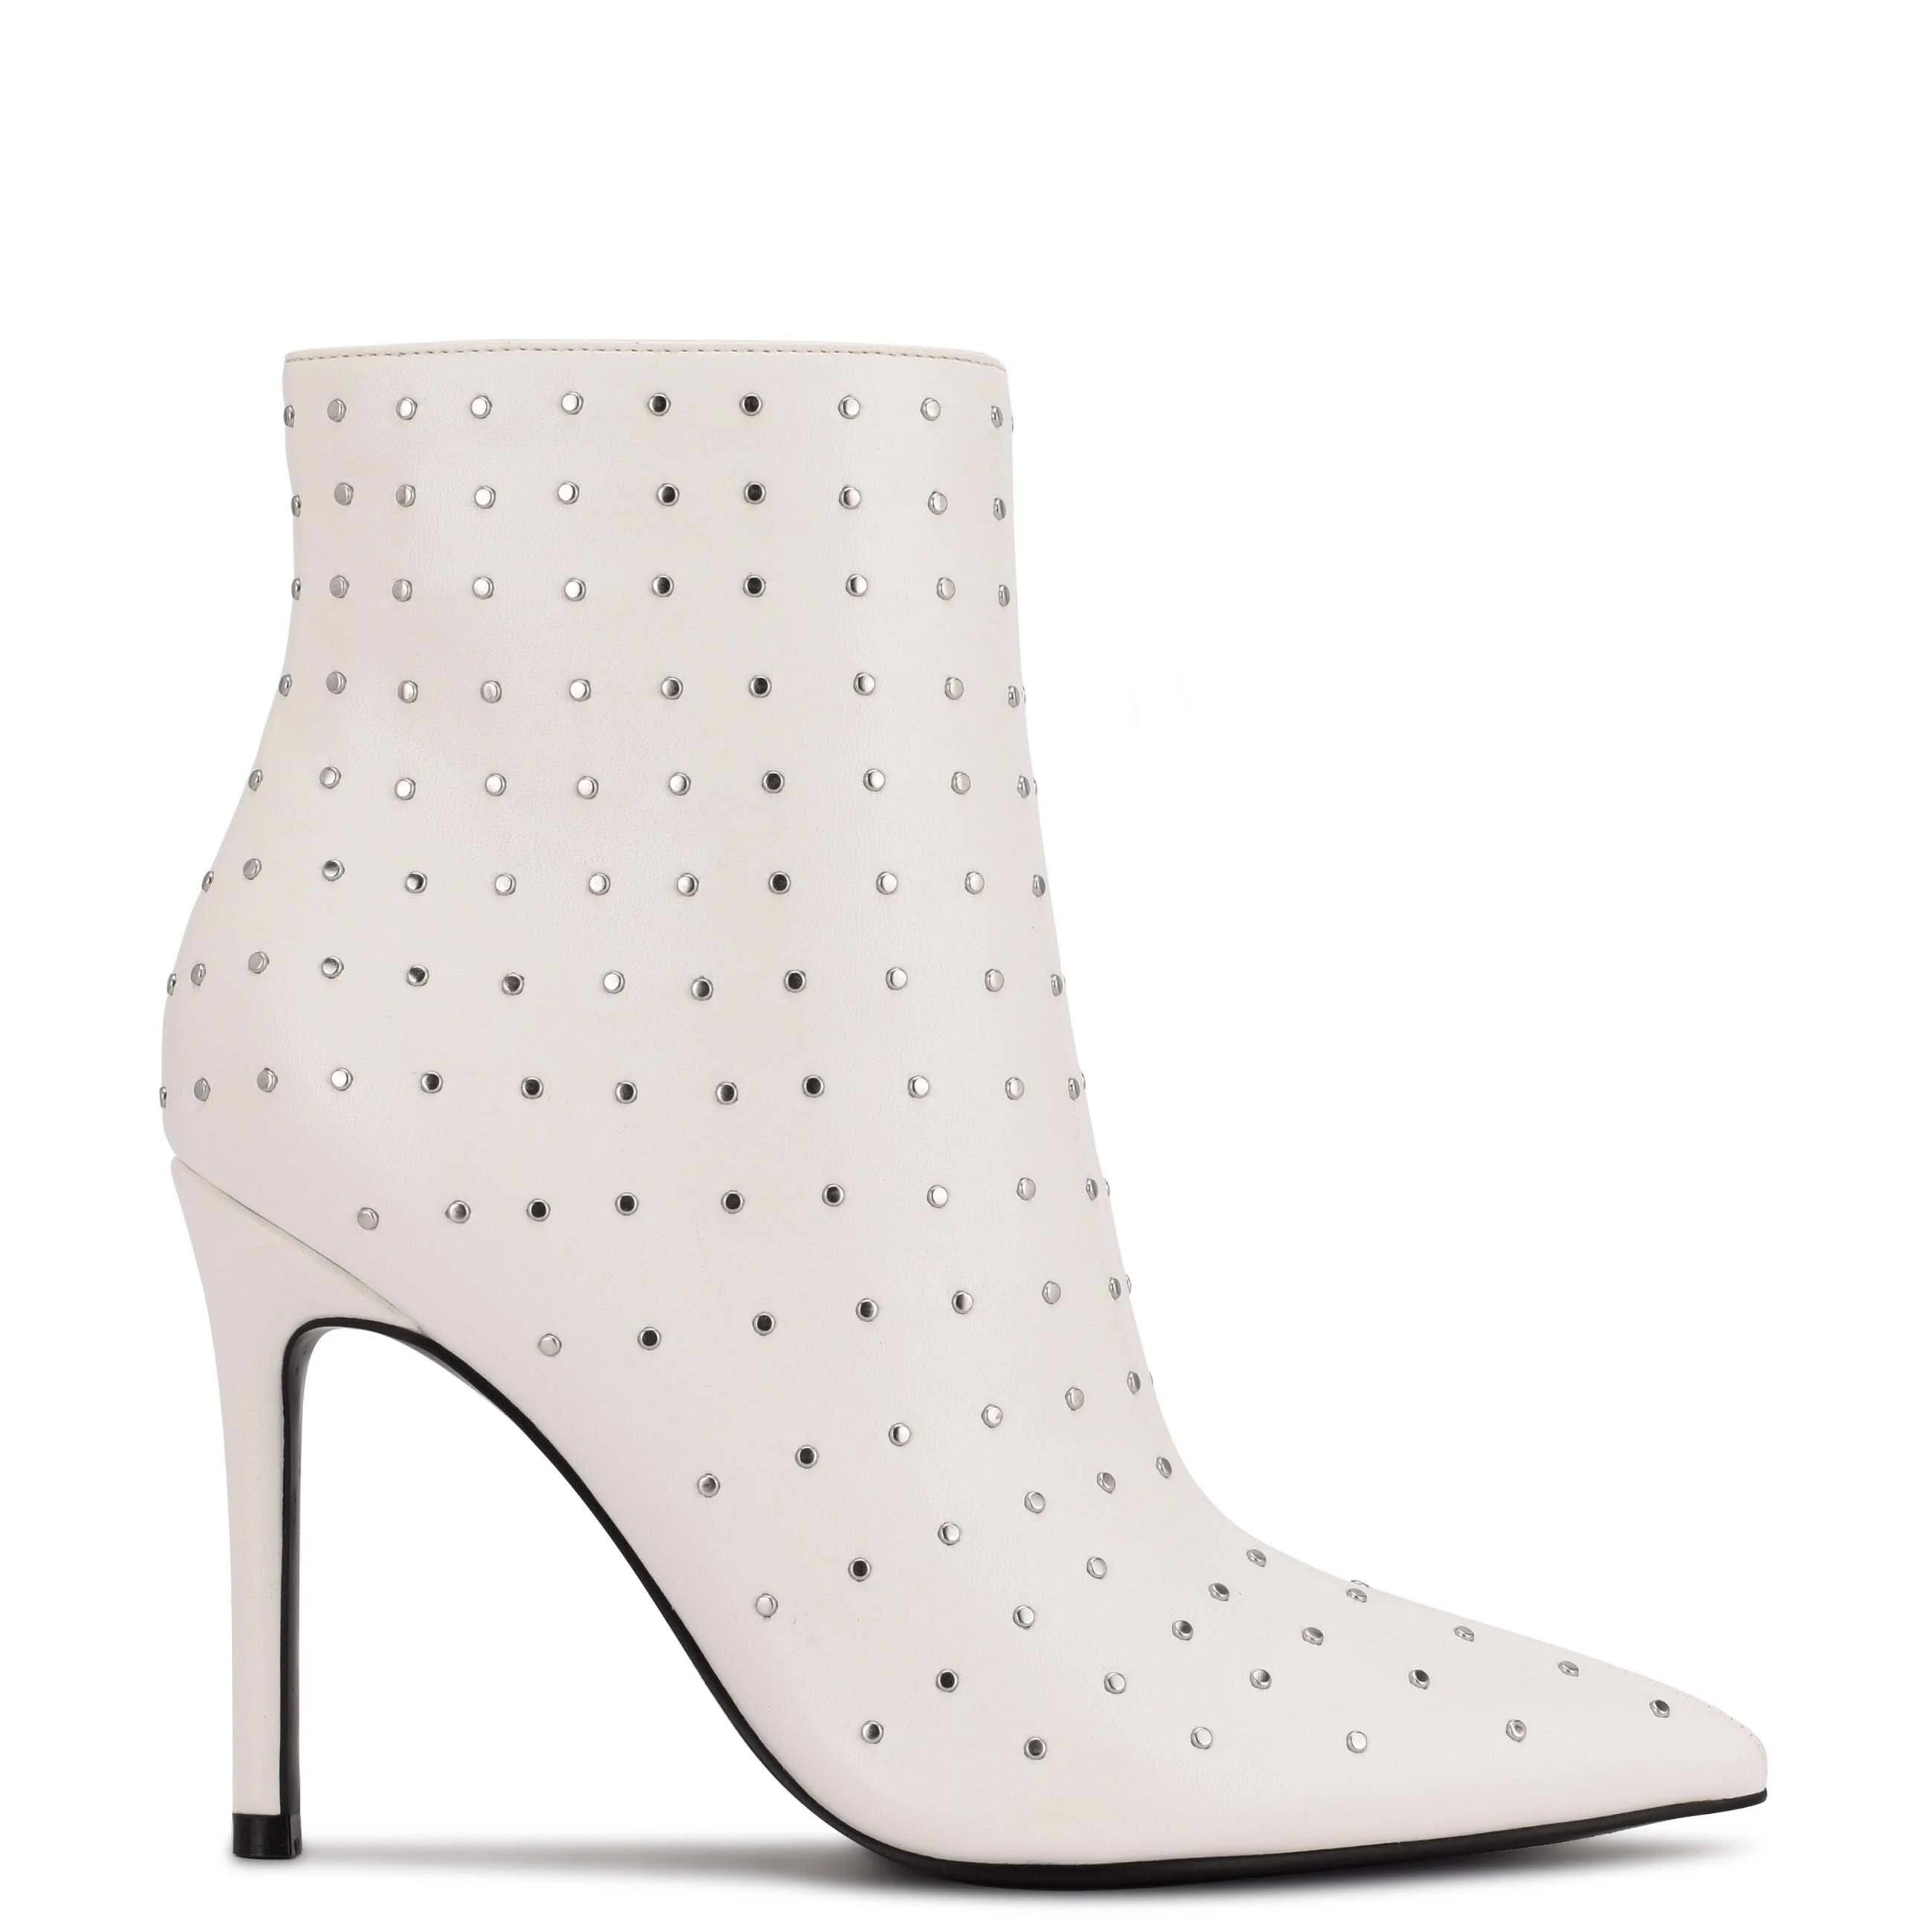 White High-Heeled Ankle Boots with Pointed Toe and Zip Closure | Image